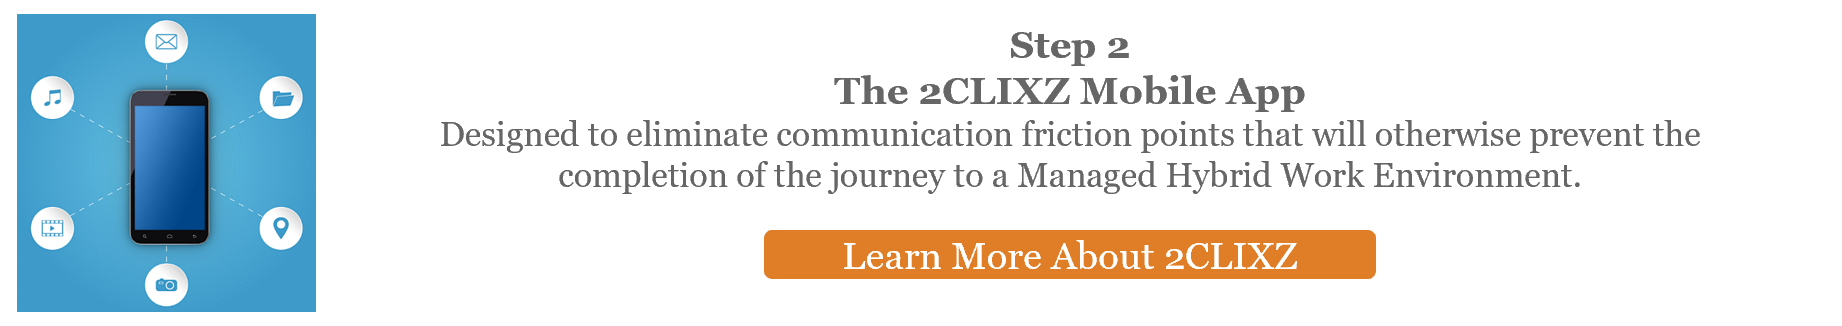 Learn More About 2CLIXZ